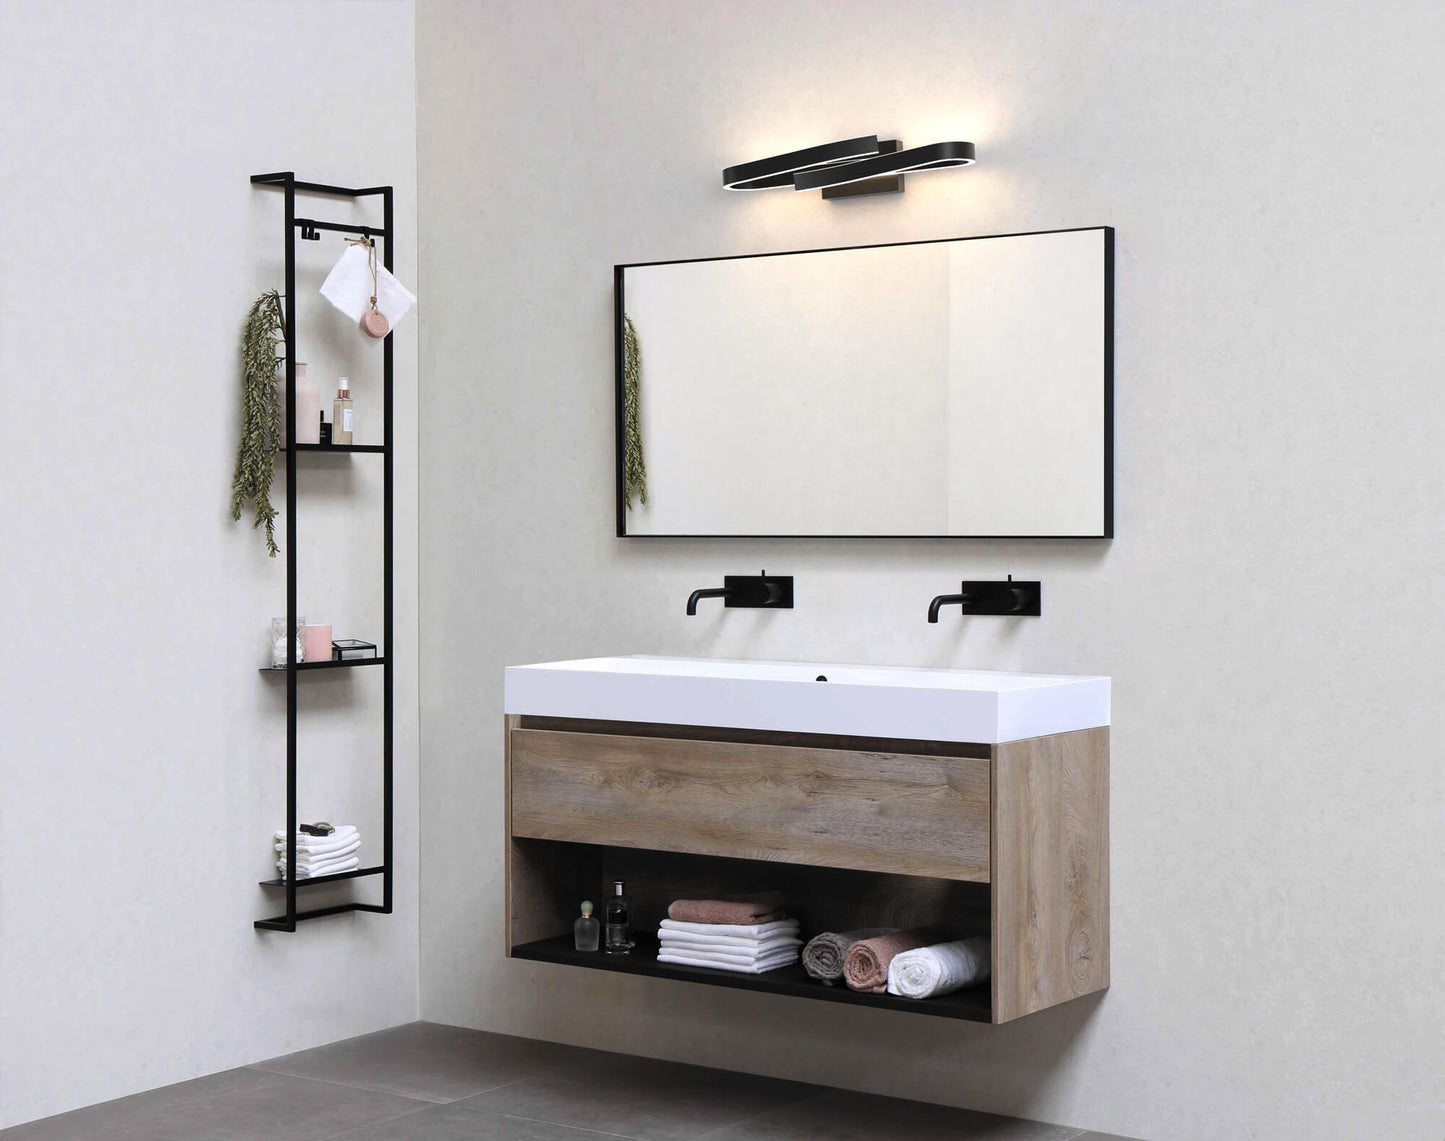 Curled rectangular vanity wall sconce